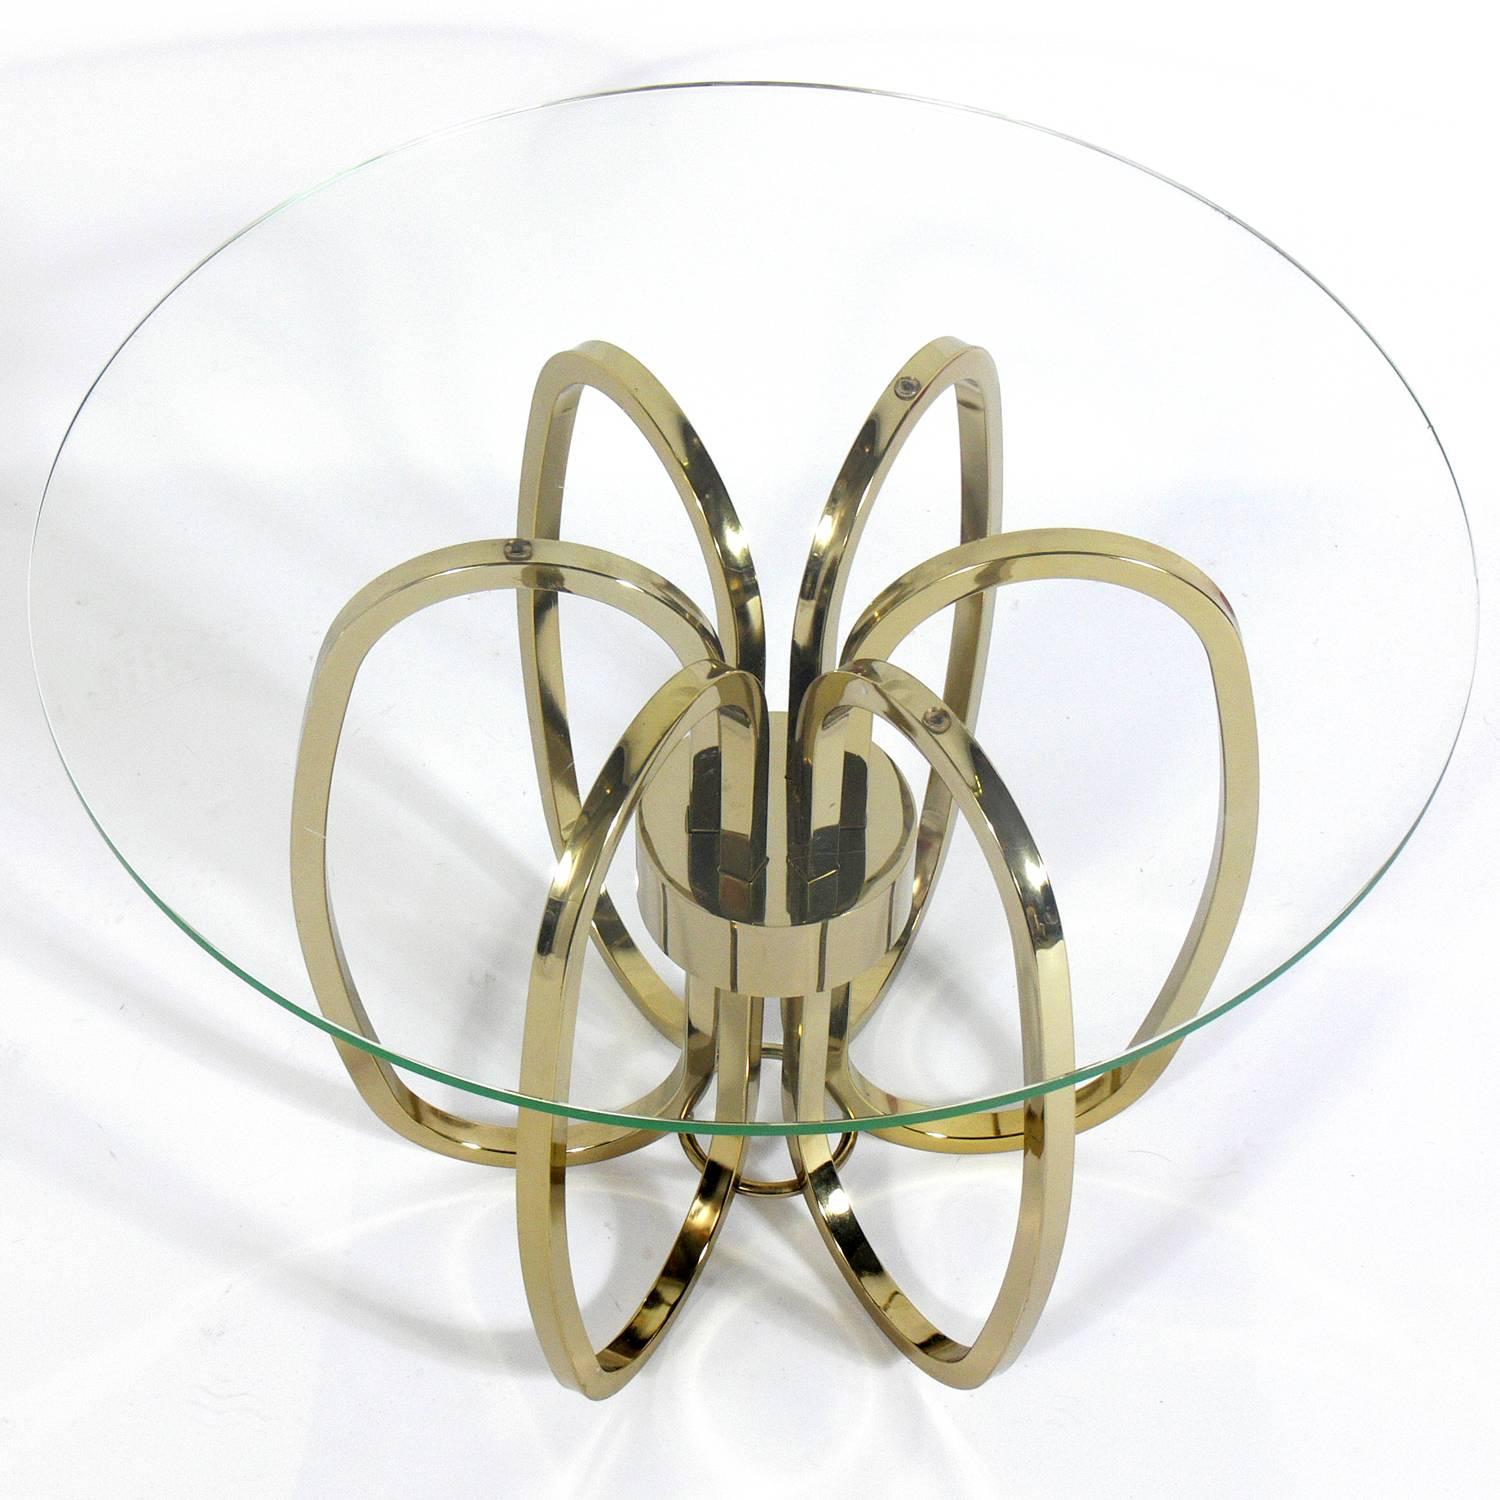 Pair of sculptural brass plated metal side tables, American, circa 1960s. They are a versatile size and can be used as end or side tables, or as nightstands.